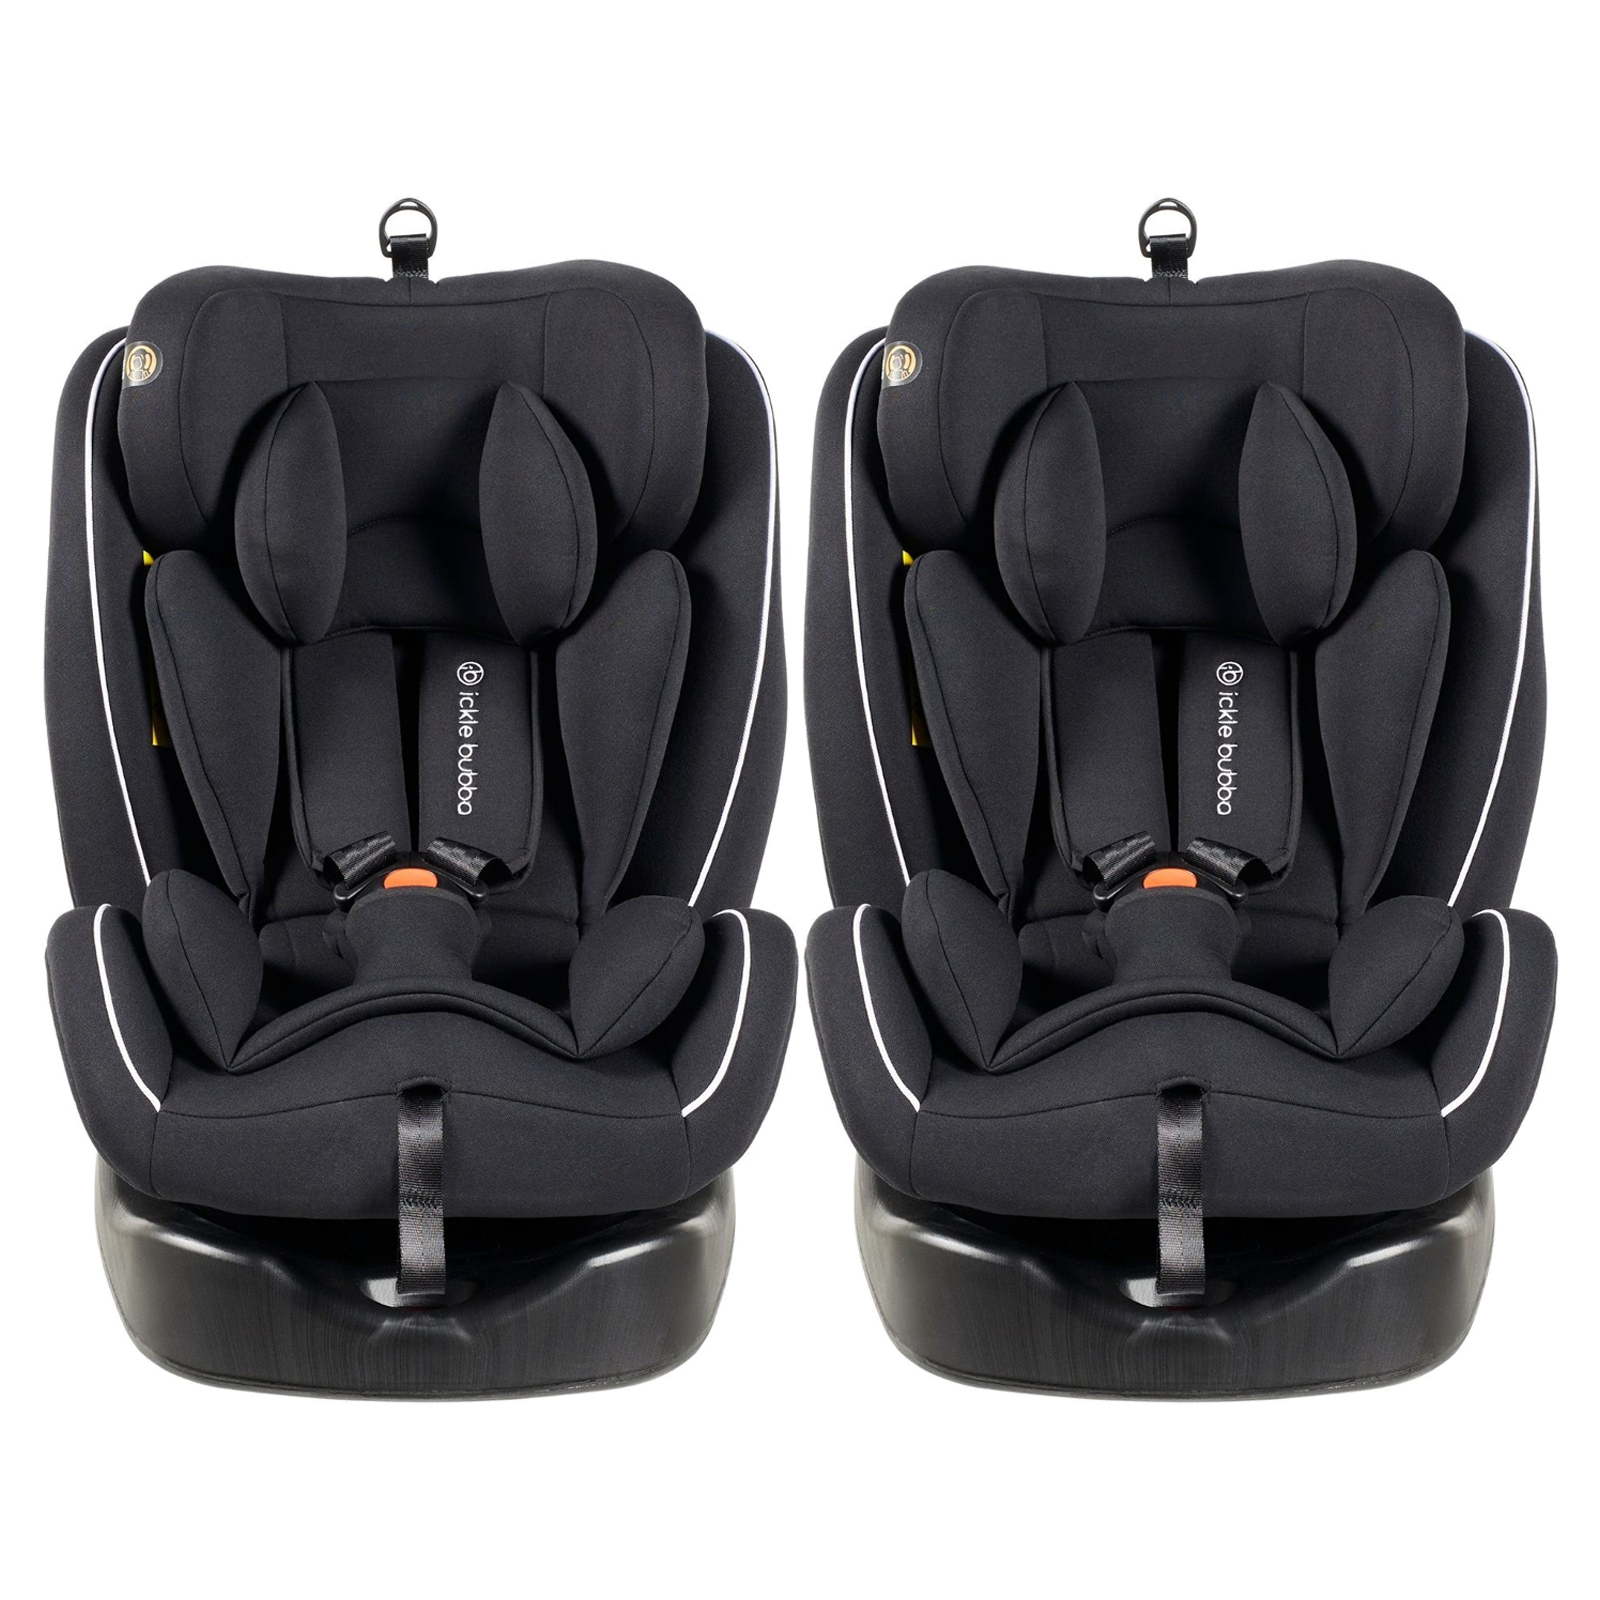 Ickle Bubba Rotator 360 Spin Group 0+/1/2/3 Car Seat - Black (2 Pack)...